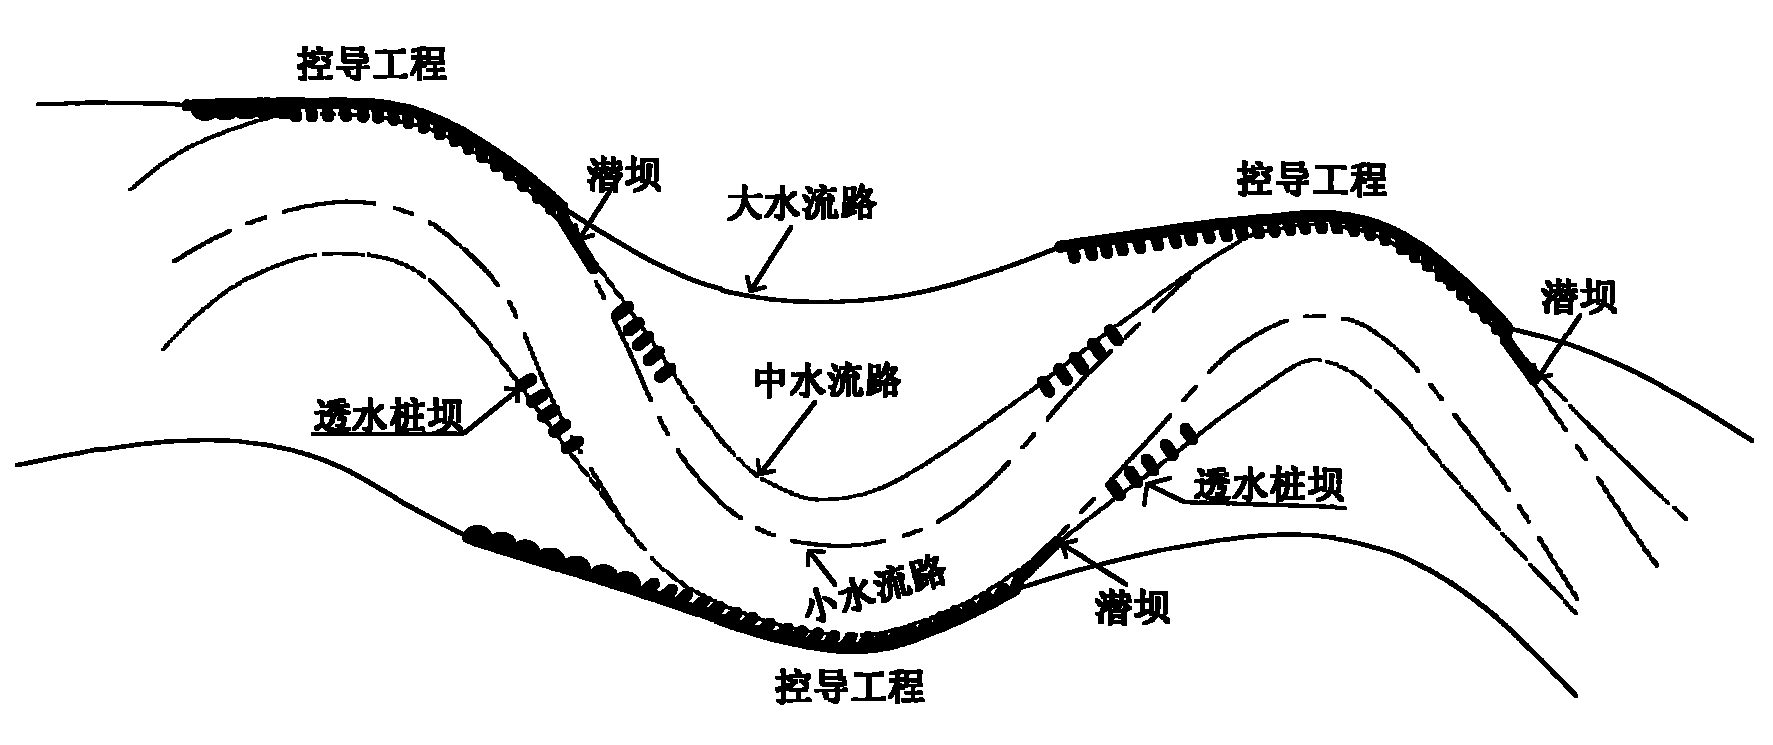 Method for creating three-stage flow passage of meandering riverway in lower Yellow River